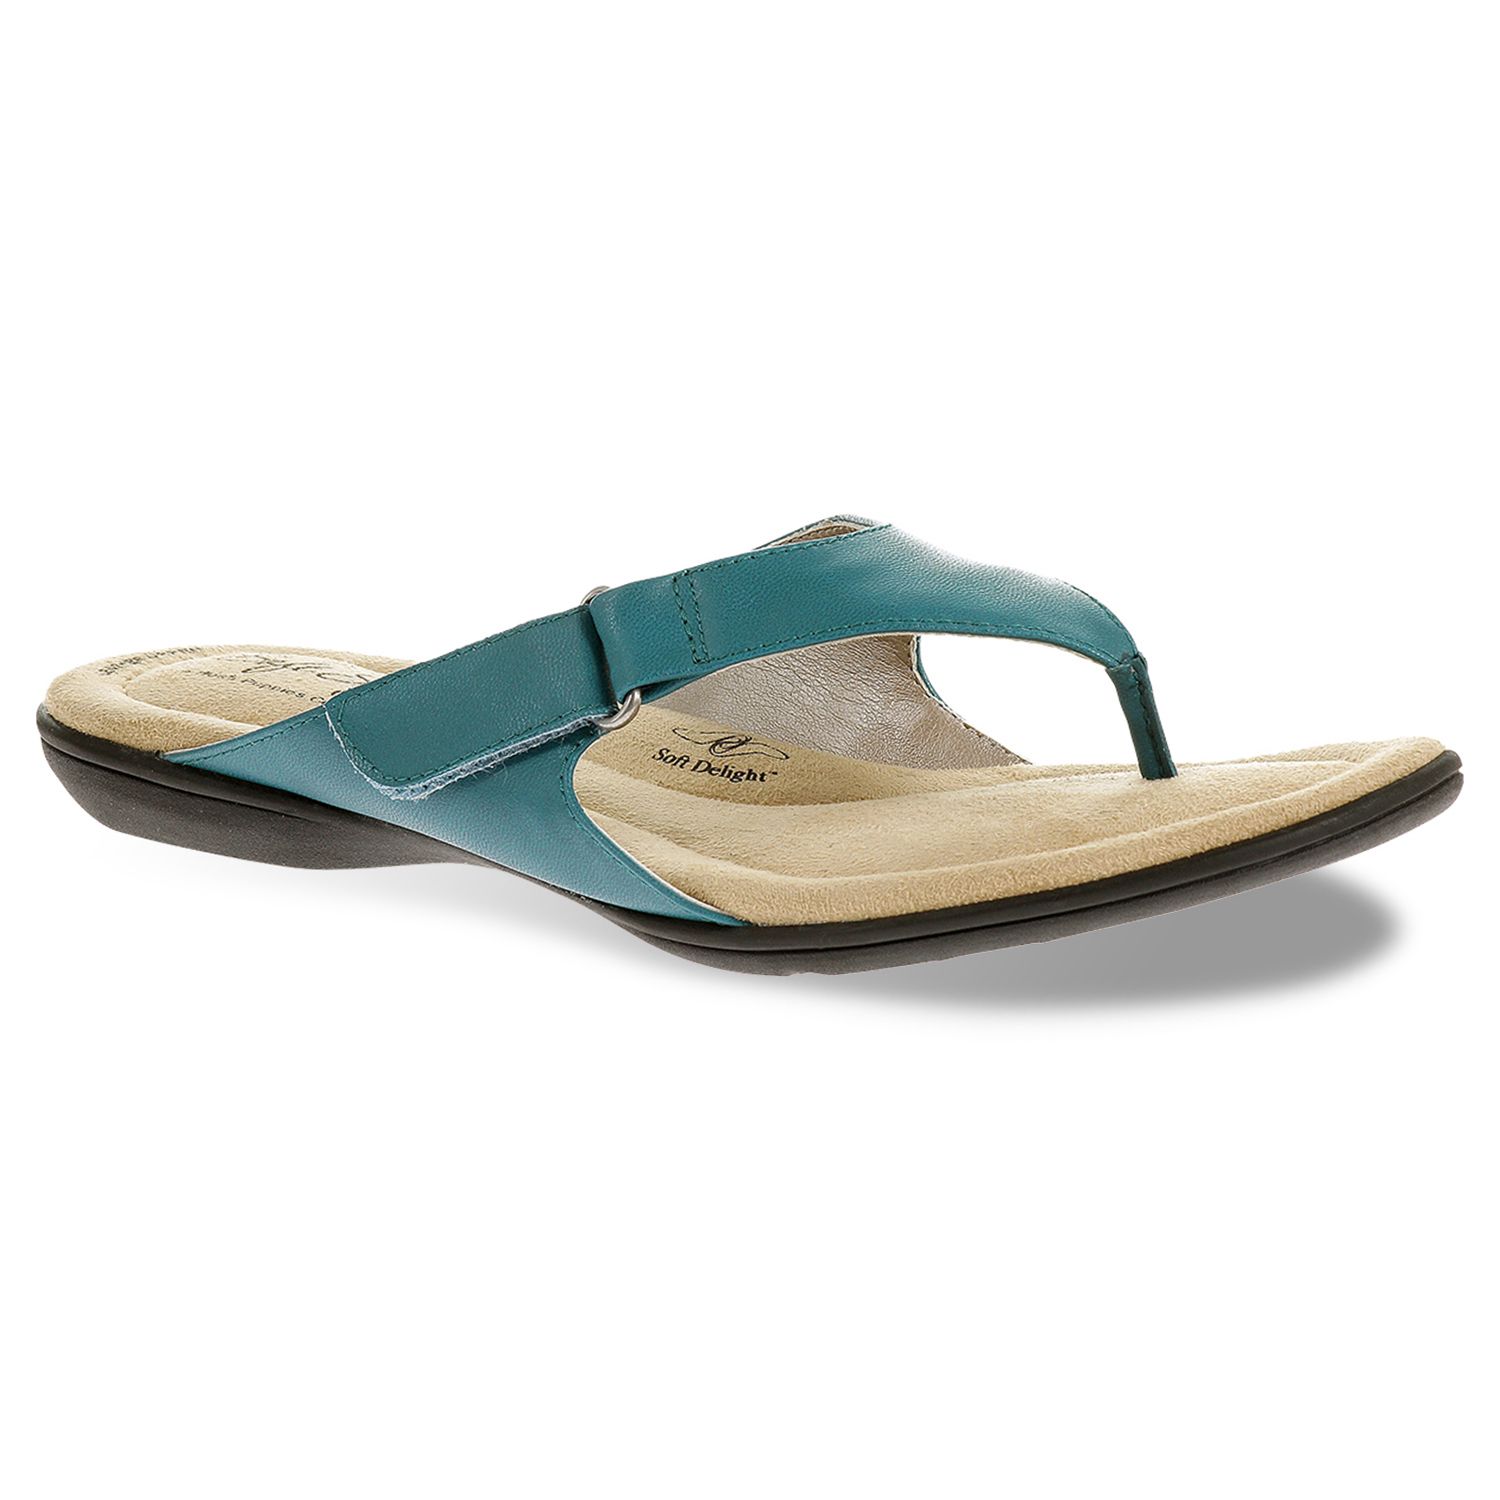 thong sandals wide width